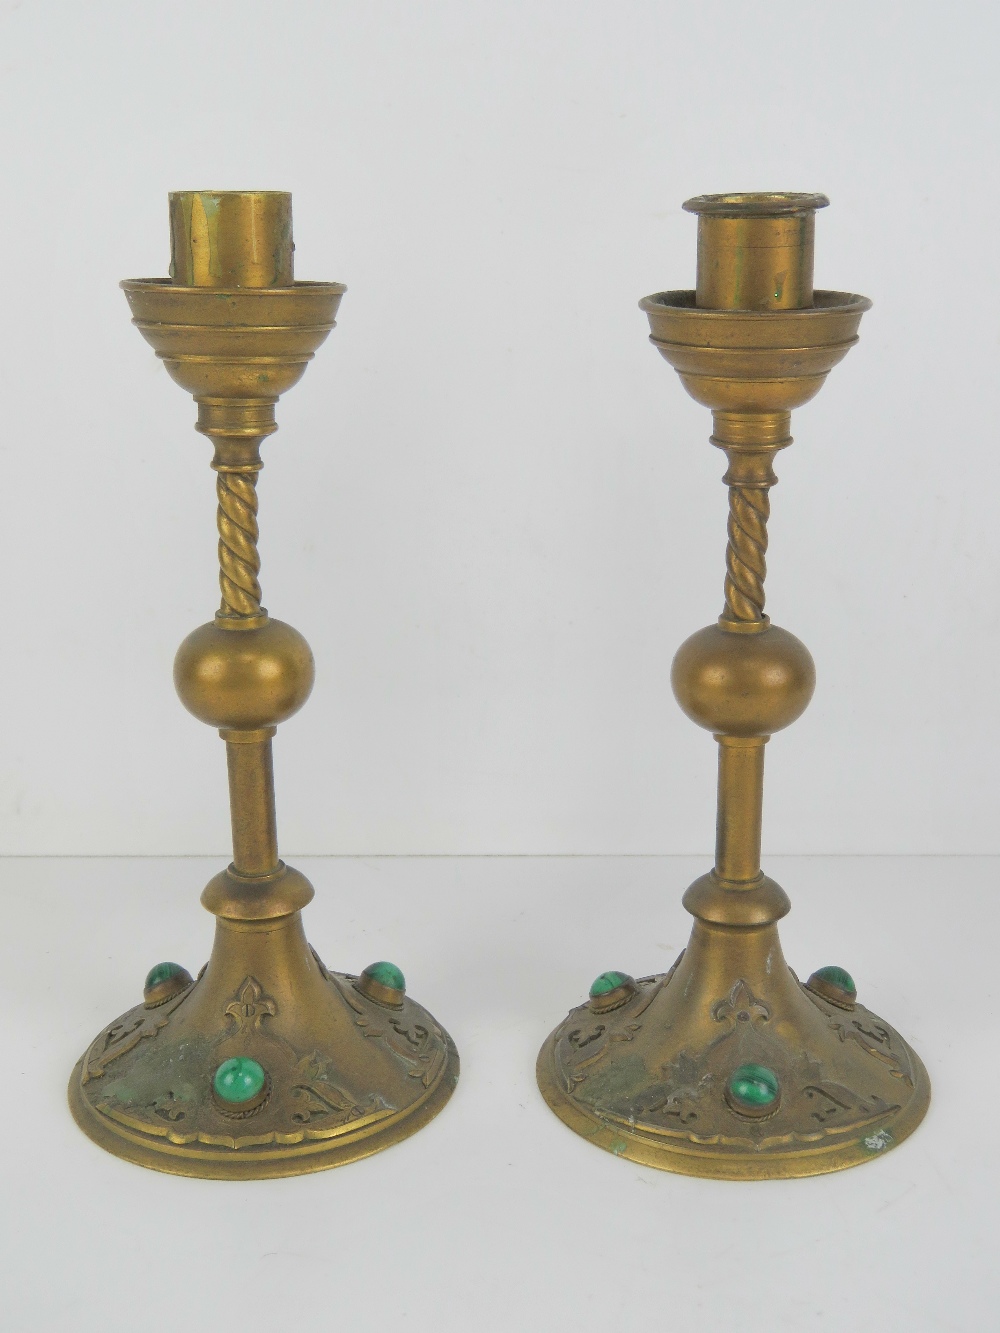 A pair of Gothic Revival brass candlesticks inset with malachite cabachons, each 22cm high.